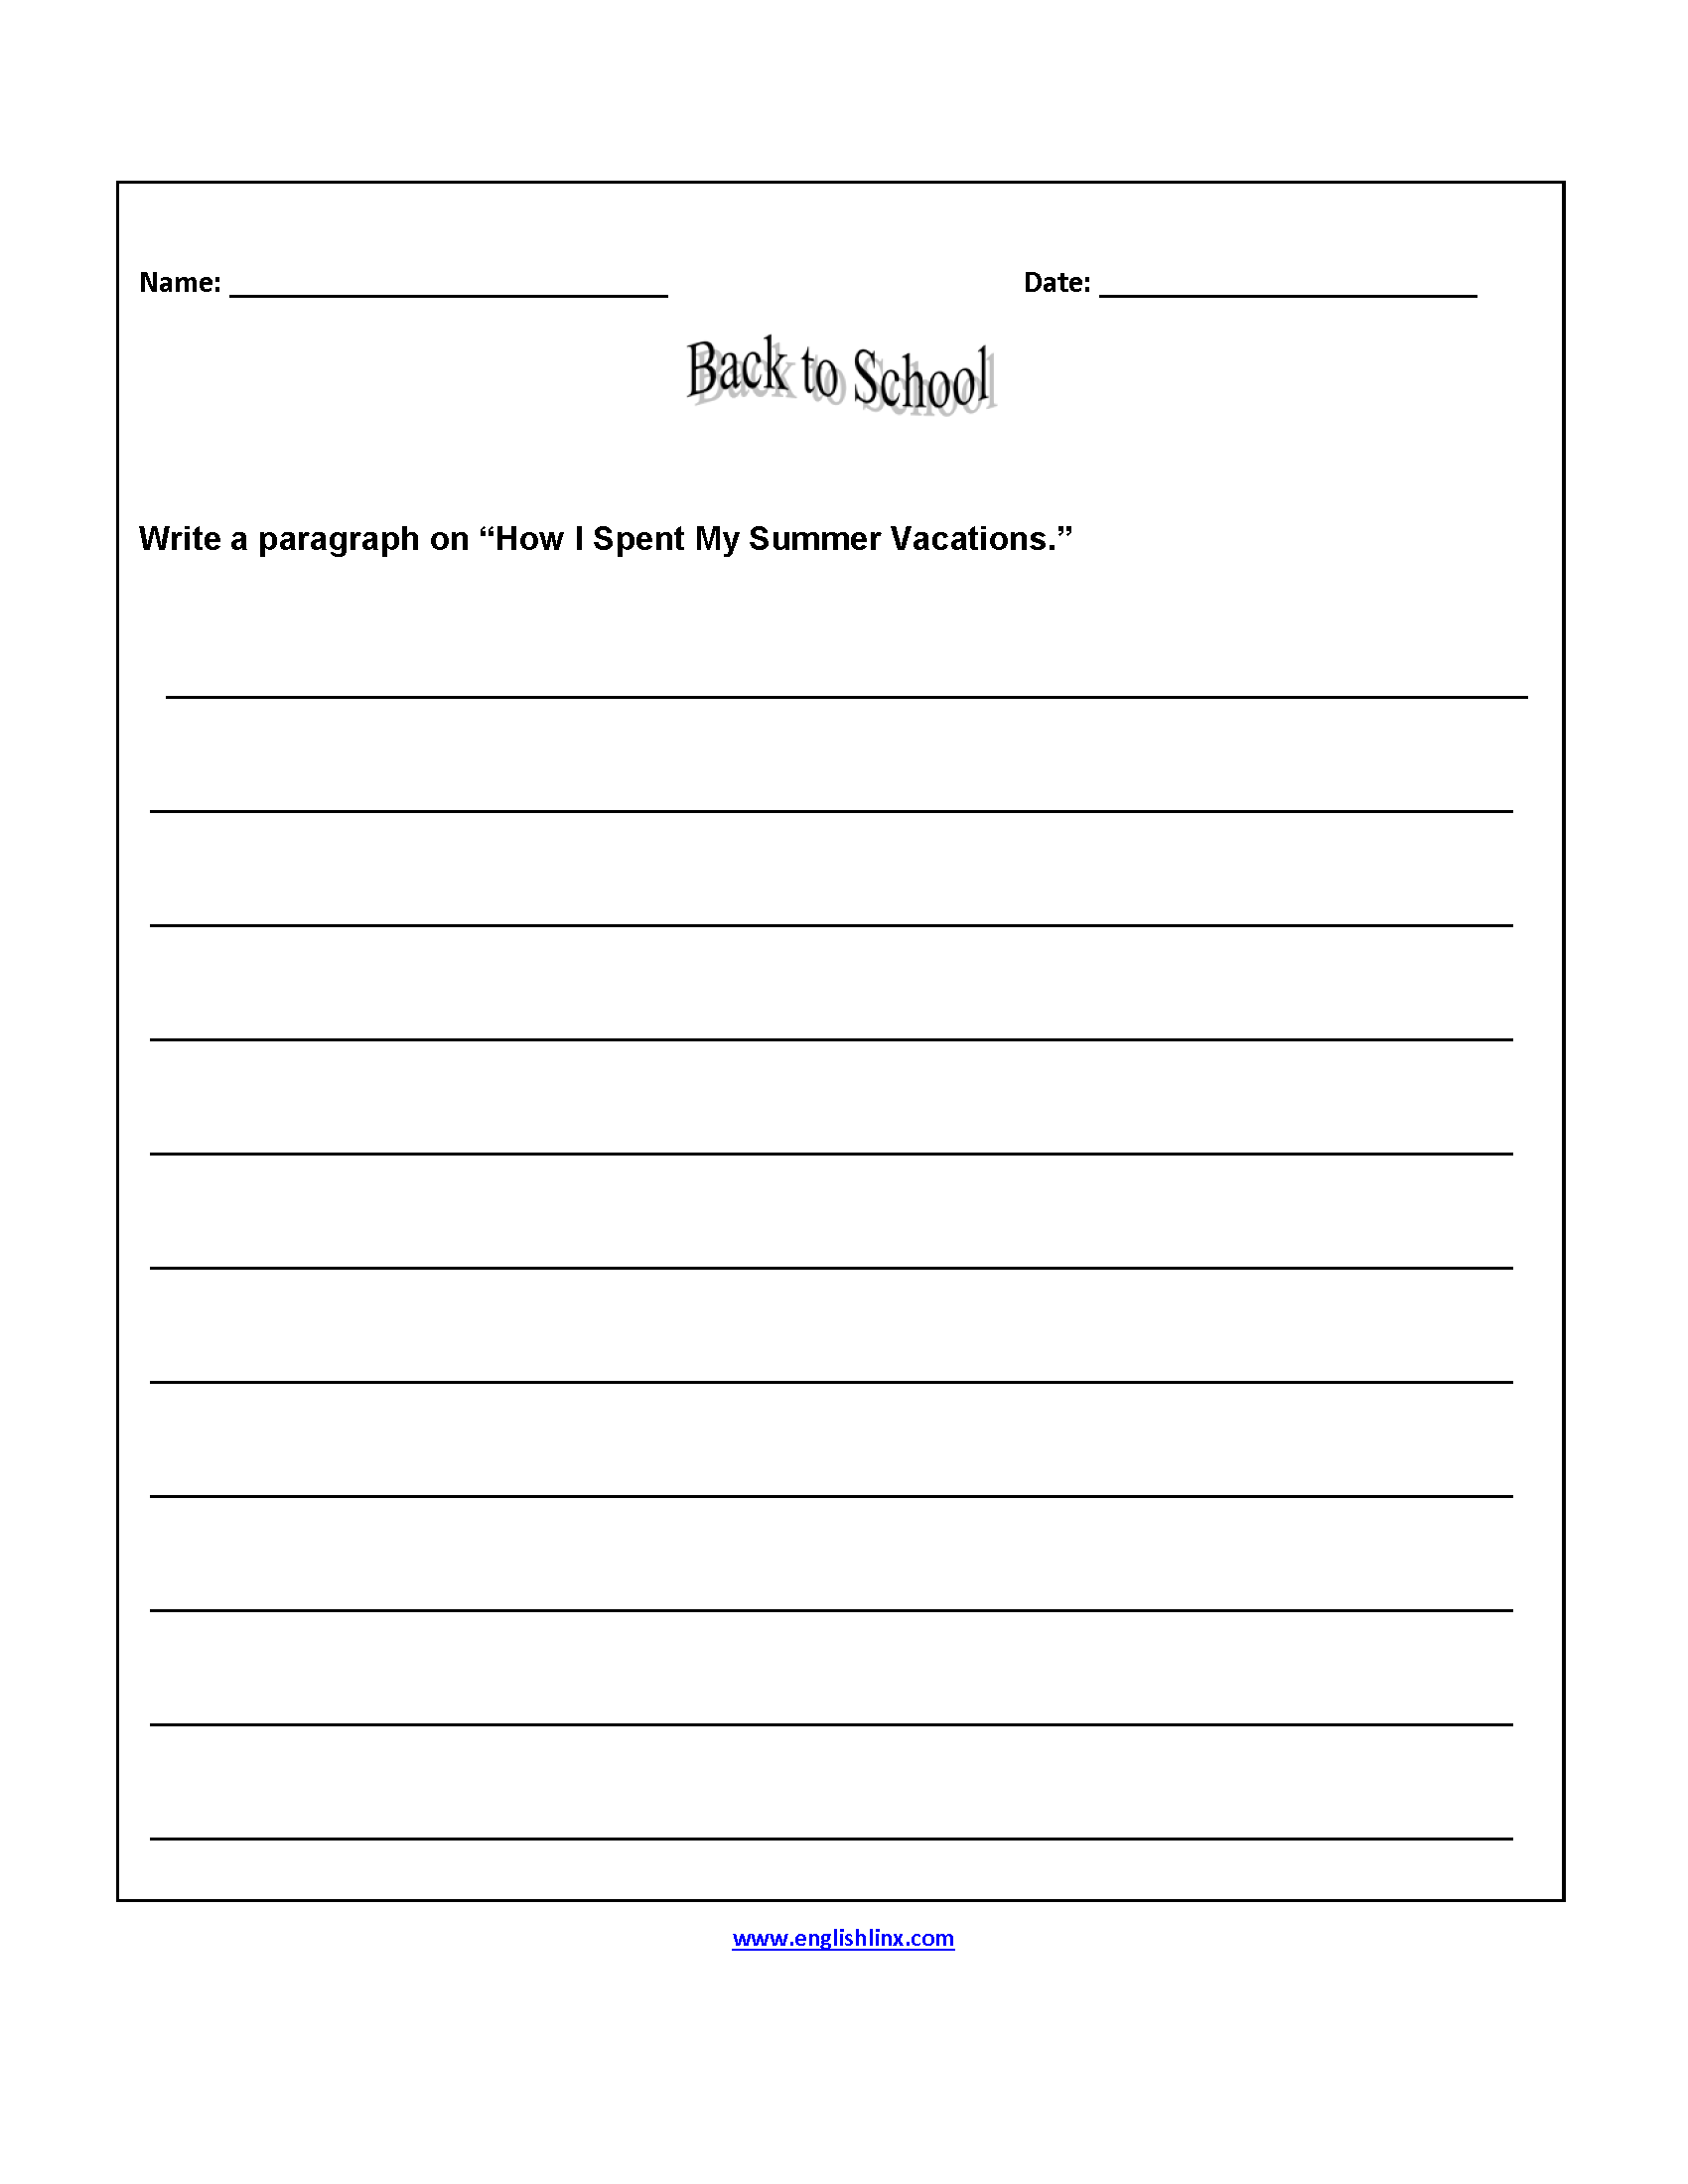 Write Paragraph Back to School Worksheets